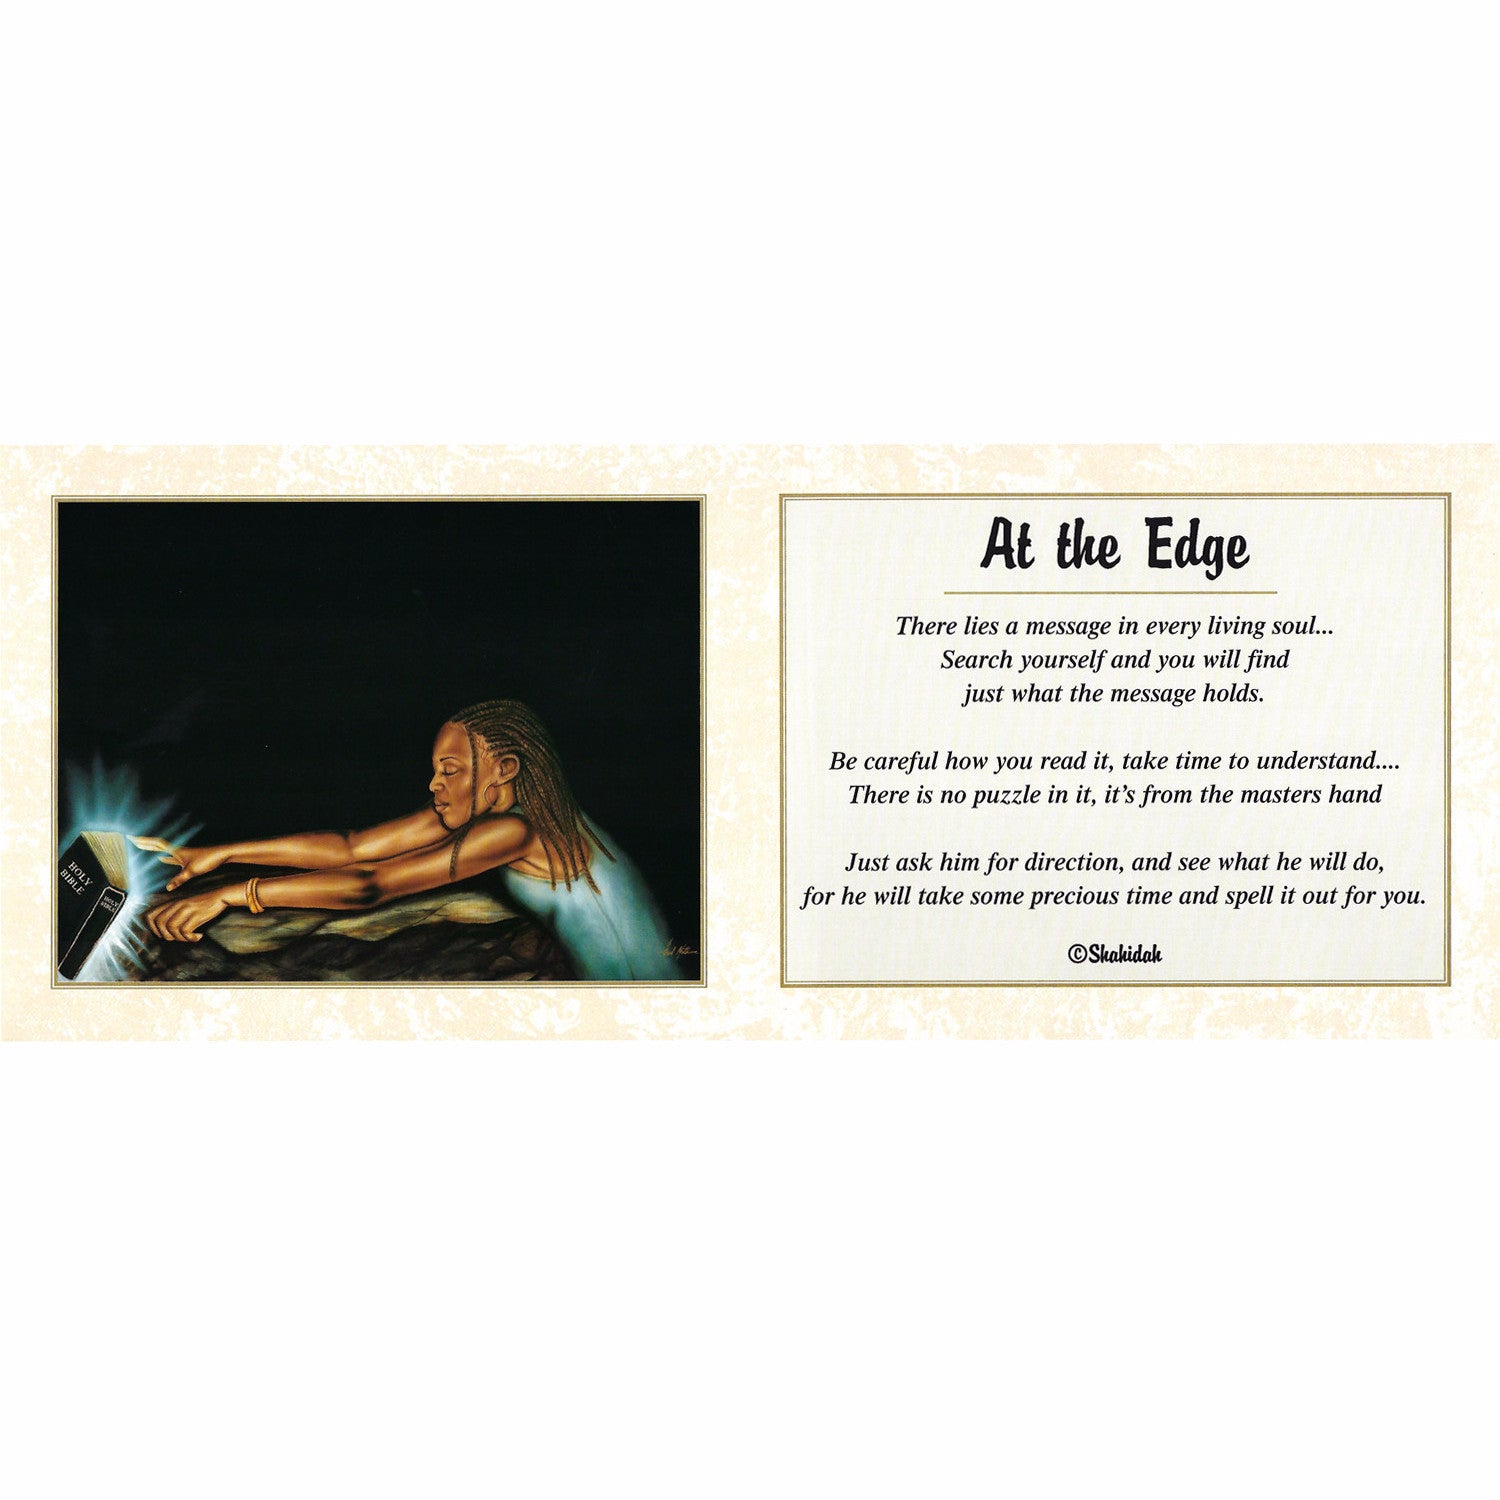 1 of 4: At the Edge (Female) by Fred Mathews and Shahidah